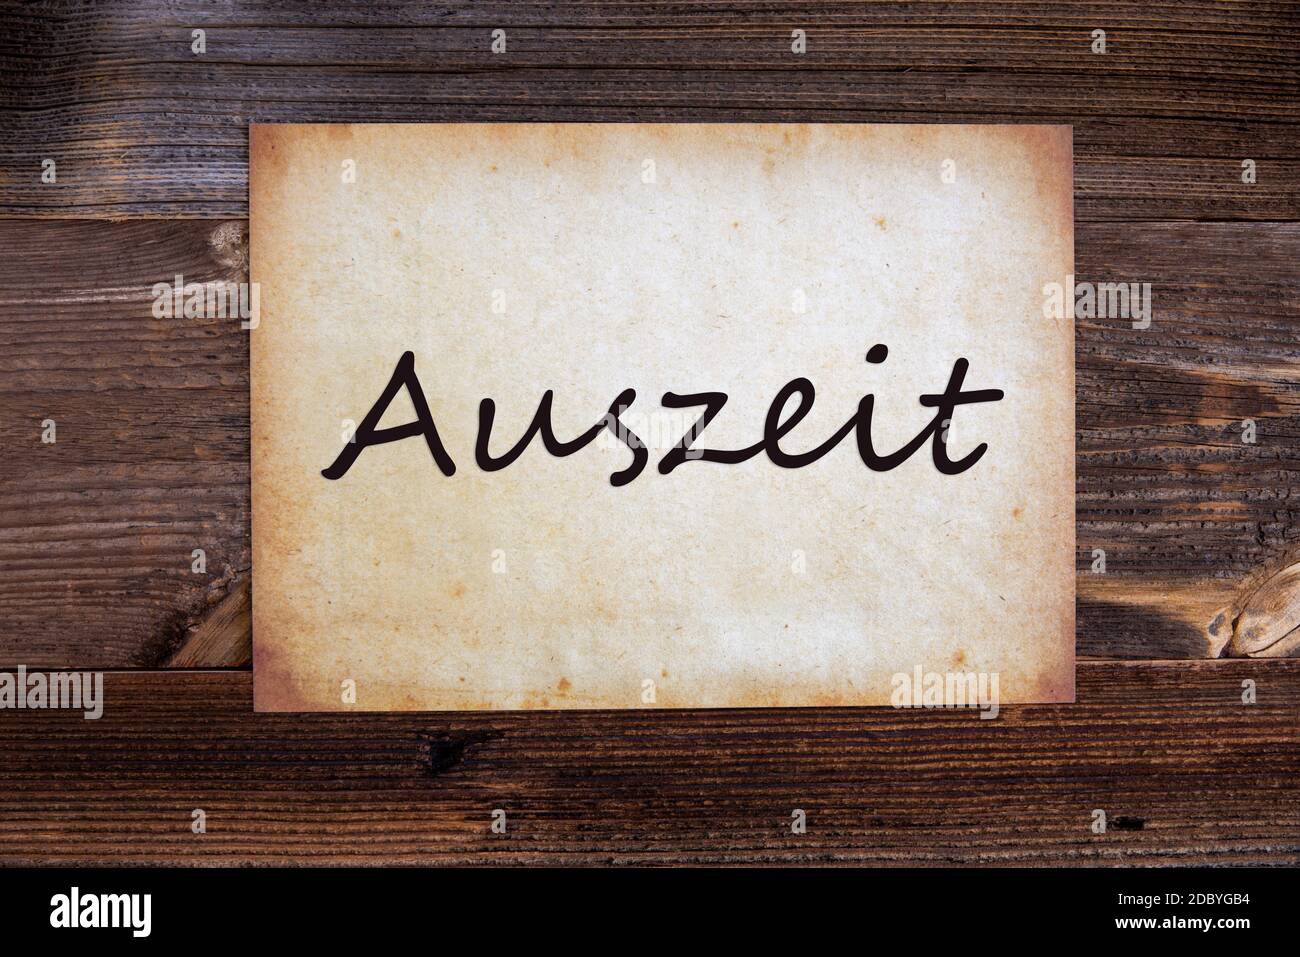 Old Grungy Paper With German Text Auszeit Means Relax. Wooden Background Stock Photo